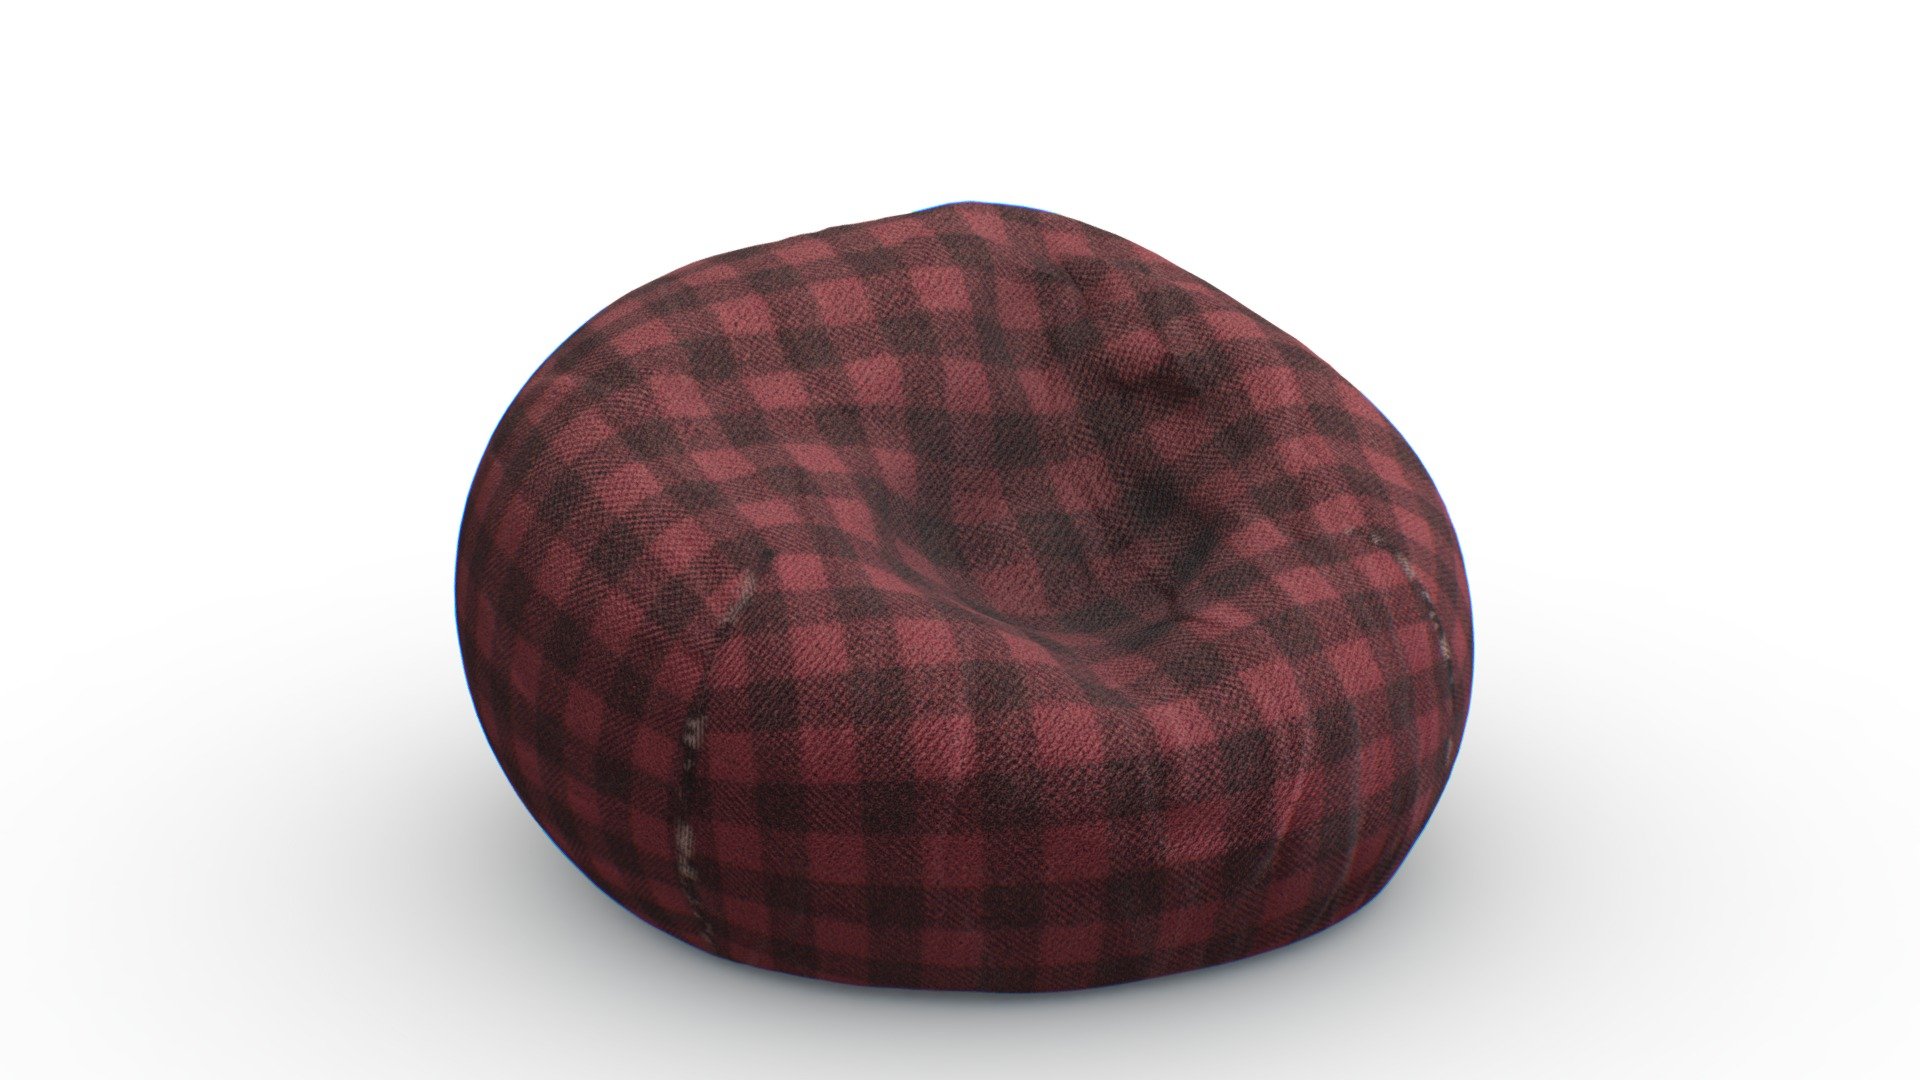 A Bean Bag
A simple bean bag with a flannel fabric texture. This chair will flip-flop around in your teen's bedroom, and no one will ever sit in it because it's too uncomfortable.

This model features 2k and 4k PBR textures made with Substance Painter.

Download includes:

  2k &amp; 4k PBR textures
  .blend file
  .fbx file
 - Simple Bean Bag - Download Free 3D model by AleixoAlonso 3d model